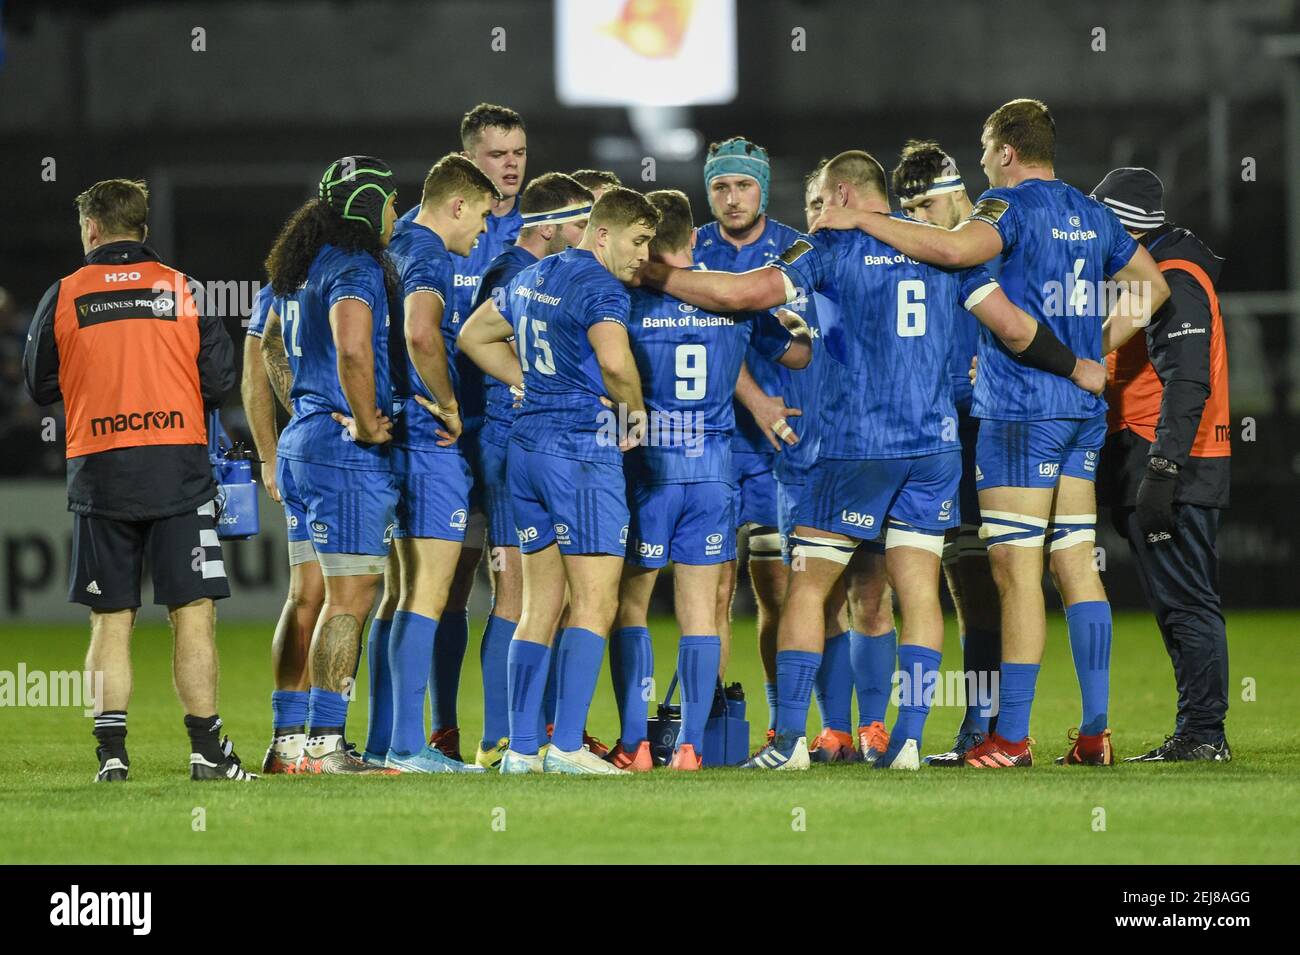 The Leinster team during the Guinness PRO14 Round 10 match between Leinster Rugby and Connacht Rugby